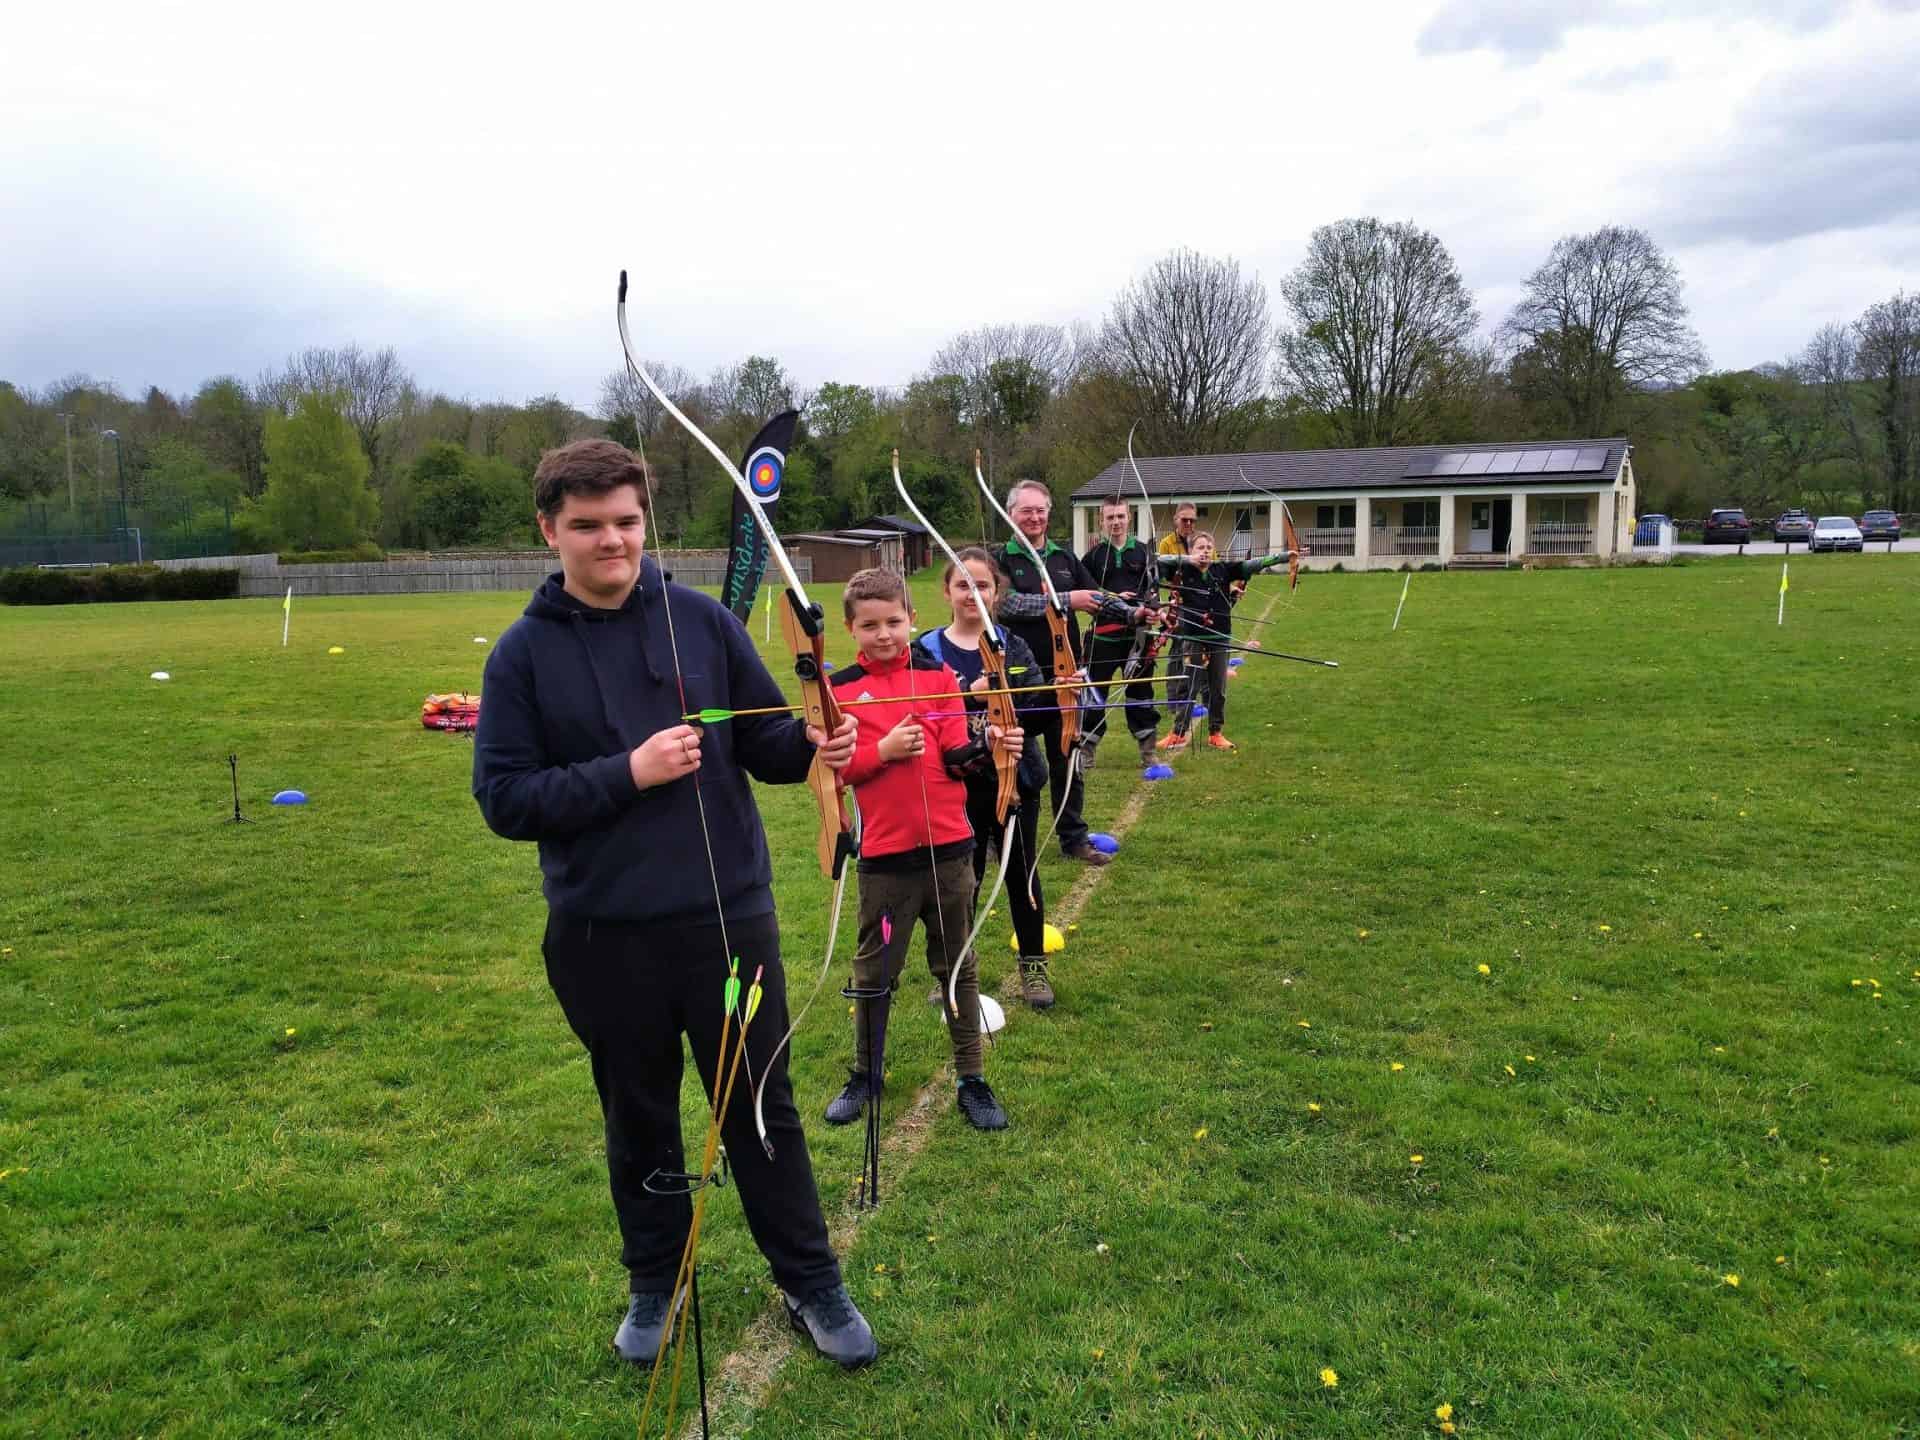 Lonsdale Archers welcomes archers to take part in their Big Reopening events